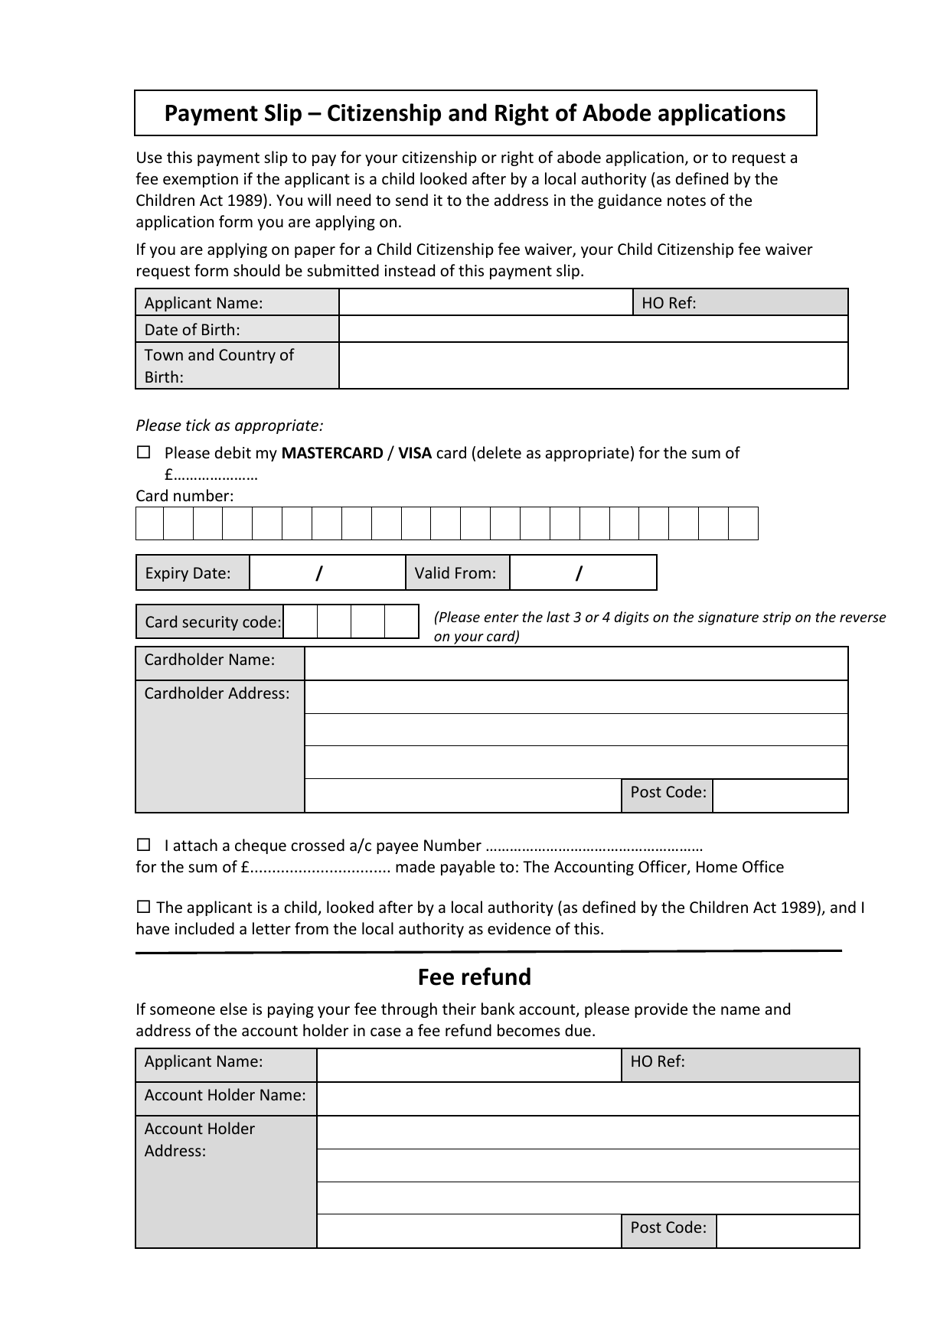 Payment Slip - Citizenship and Right of Abode Applications - United Kingdom, Page 1